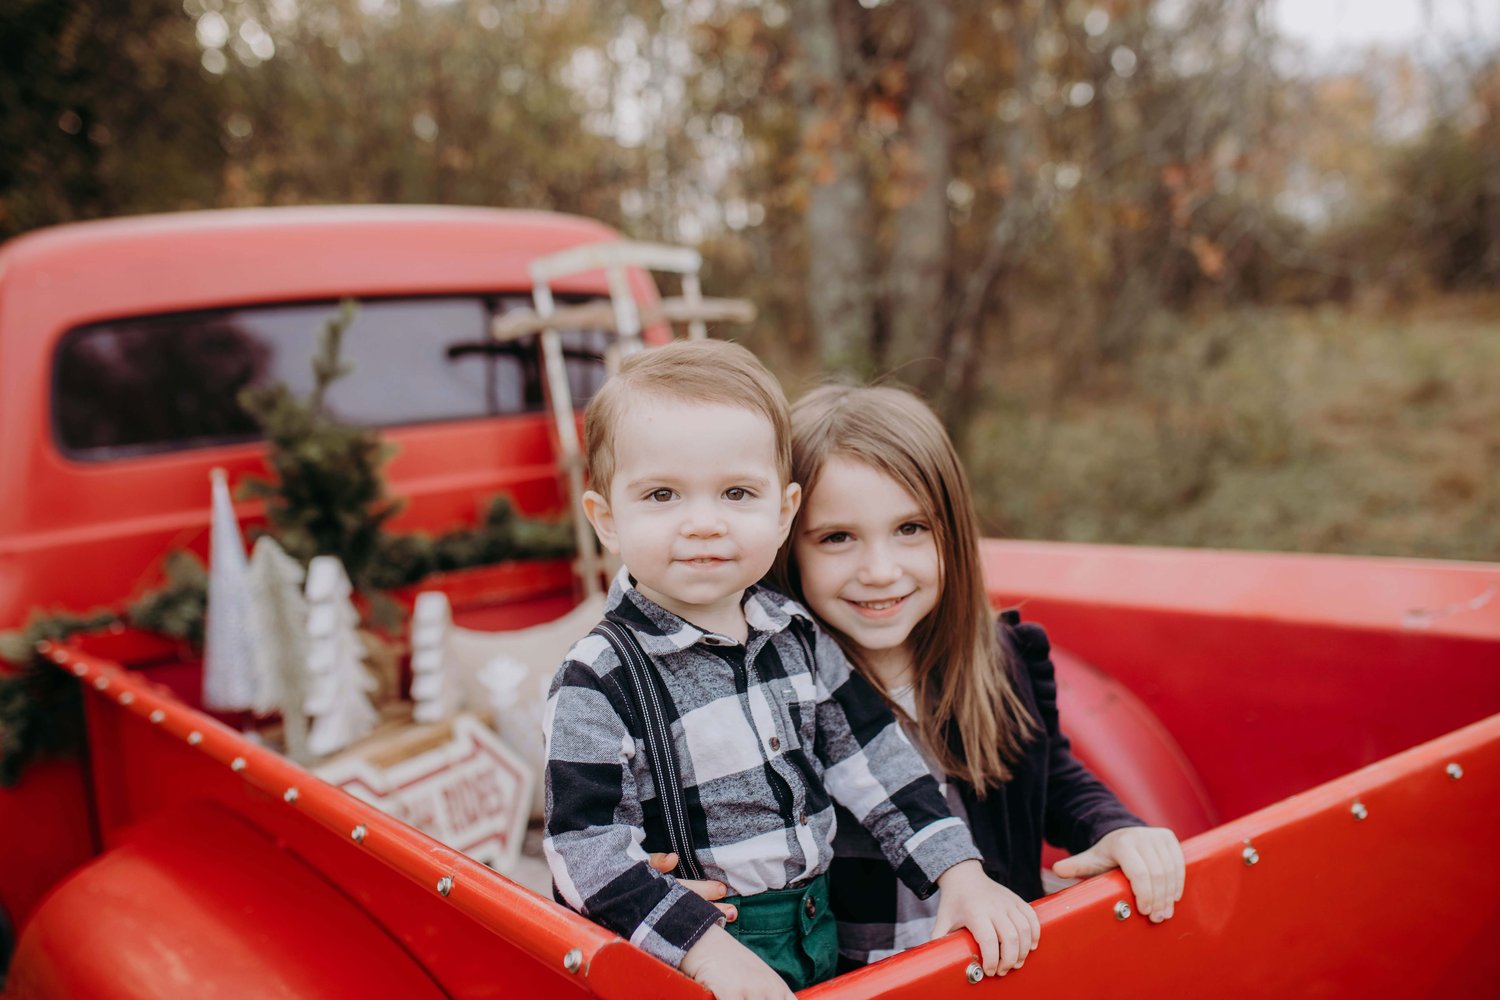 Image of Red Vintage Truck Holiday Mini Sessions 2022